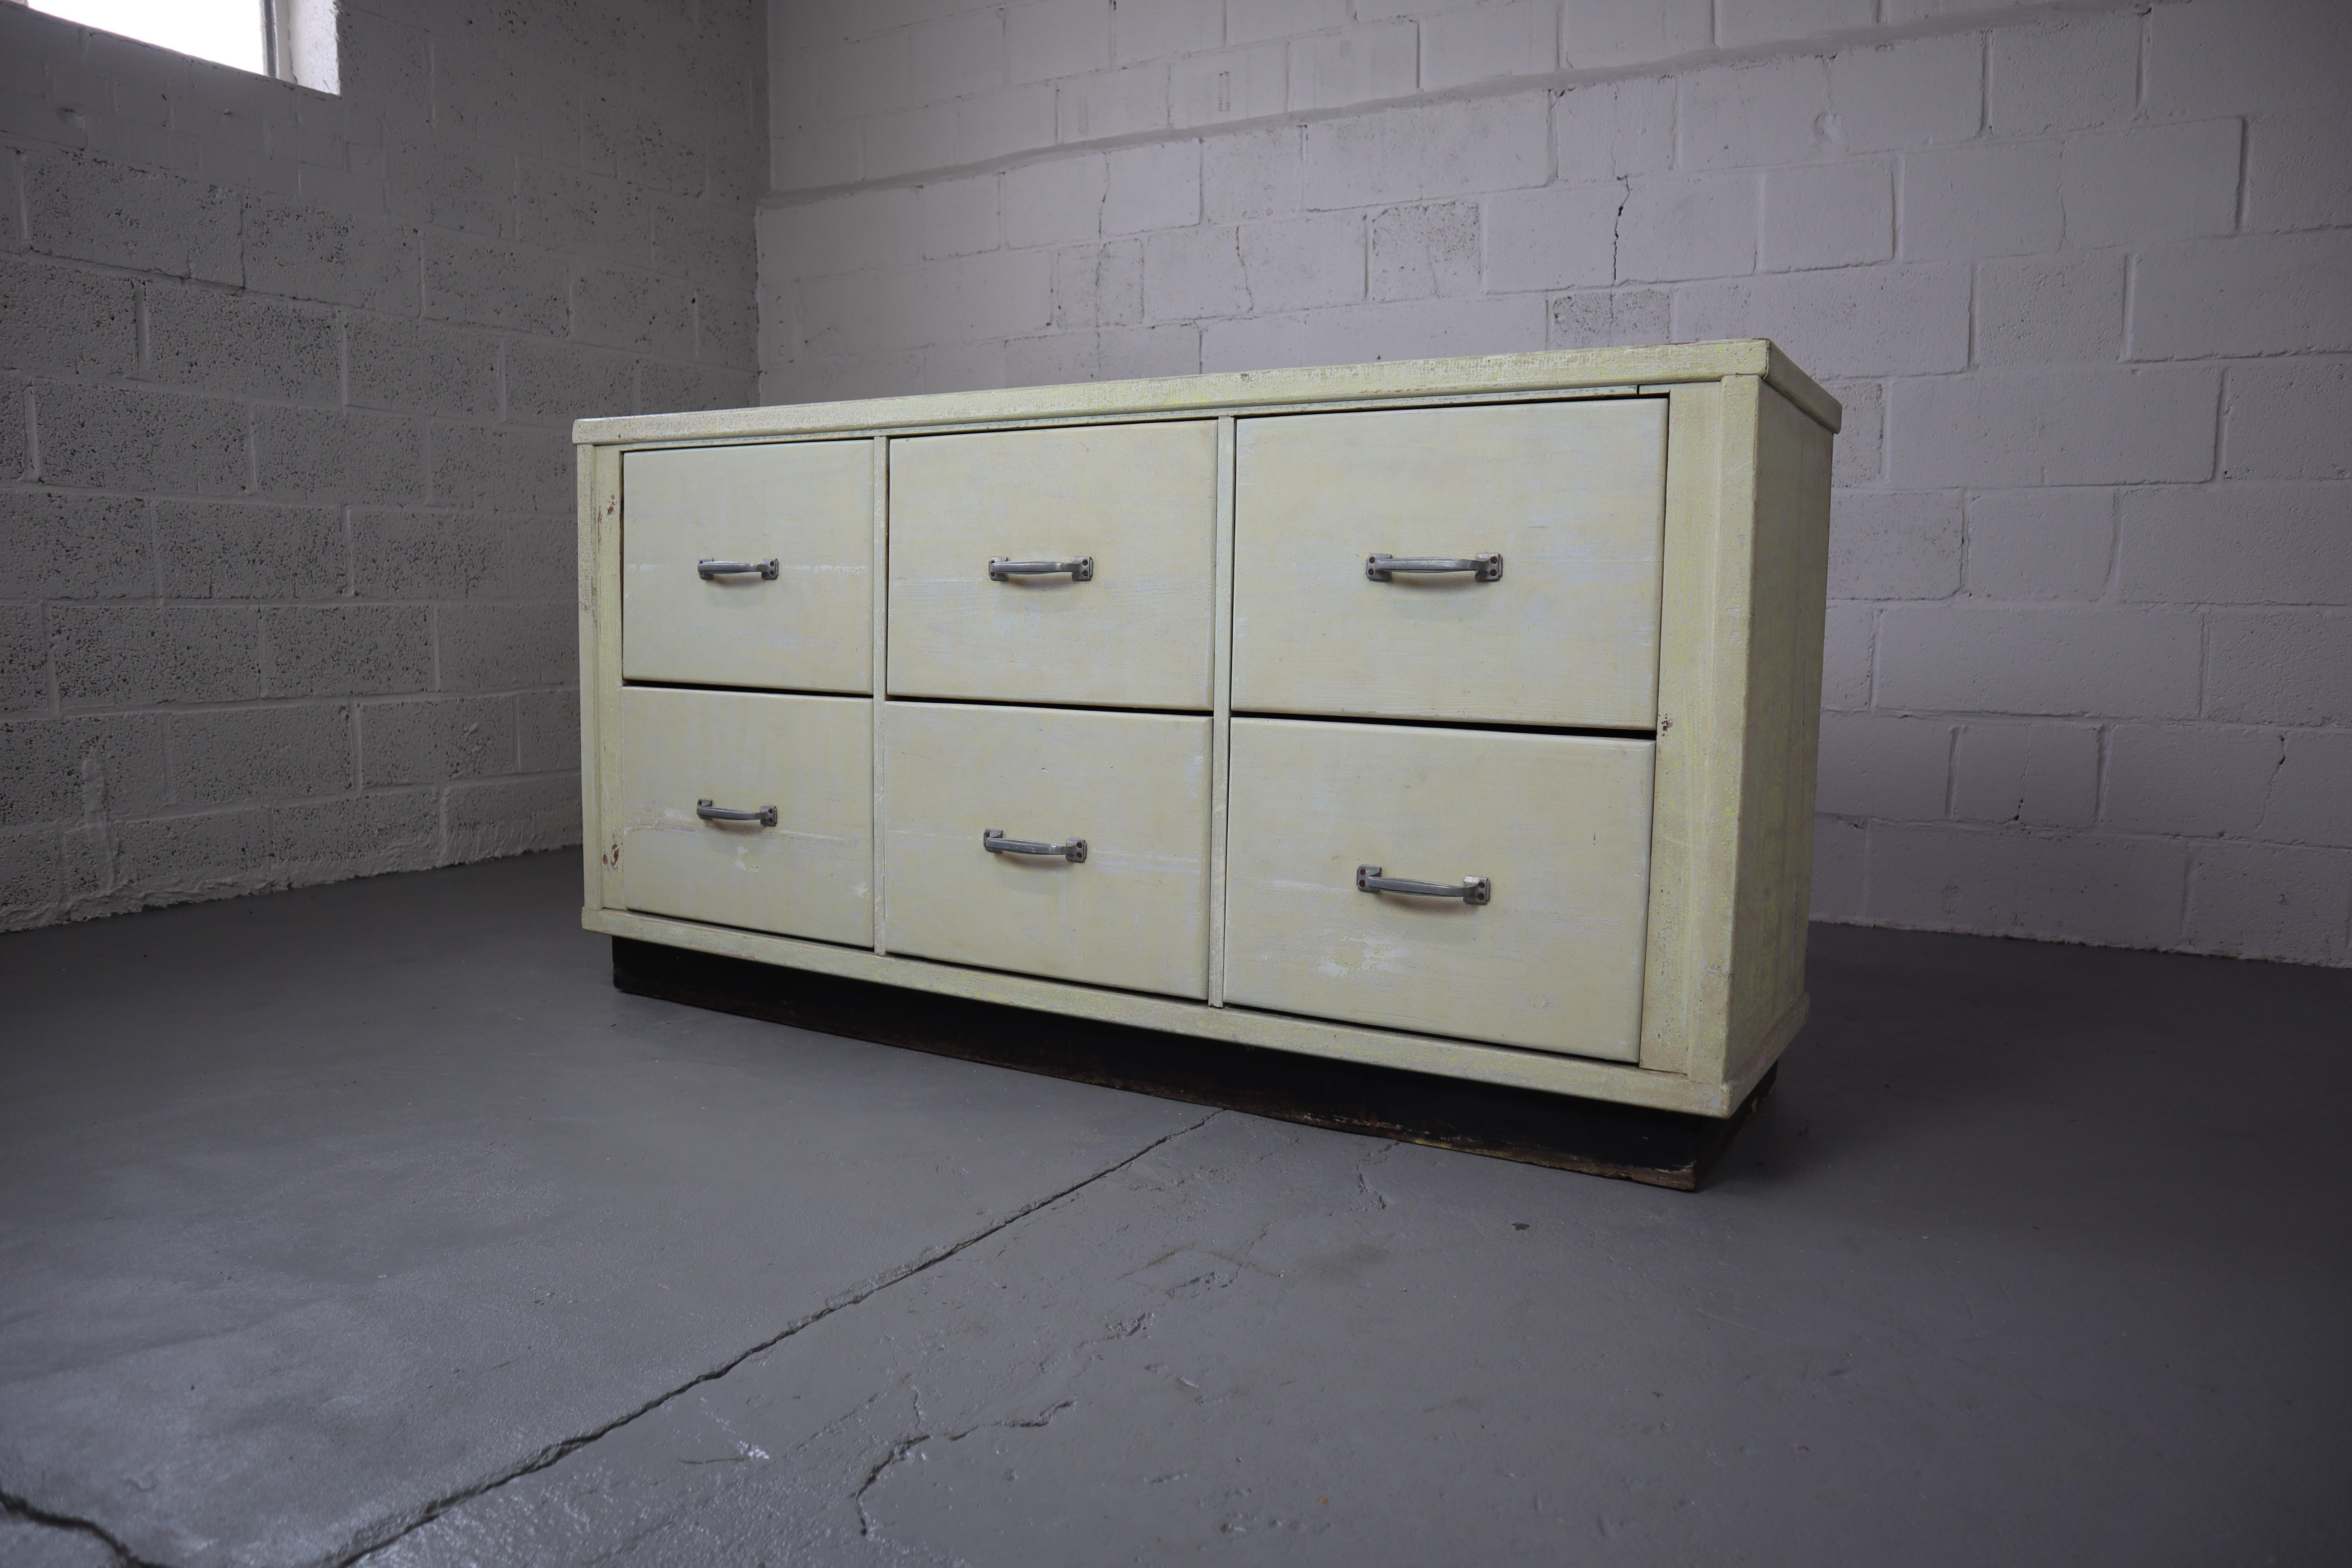 Aluminum Industrial Weathered Bank of Drawers